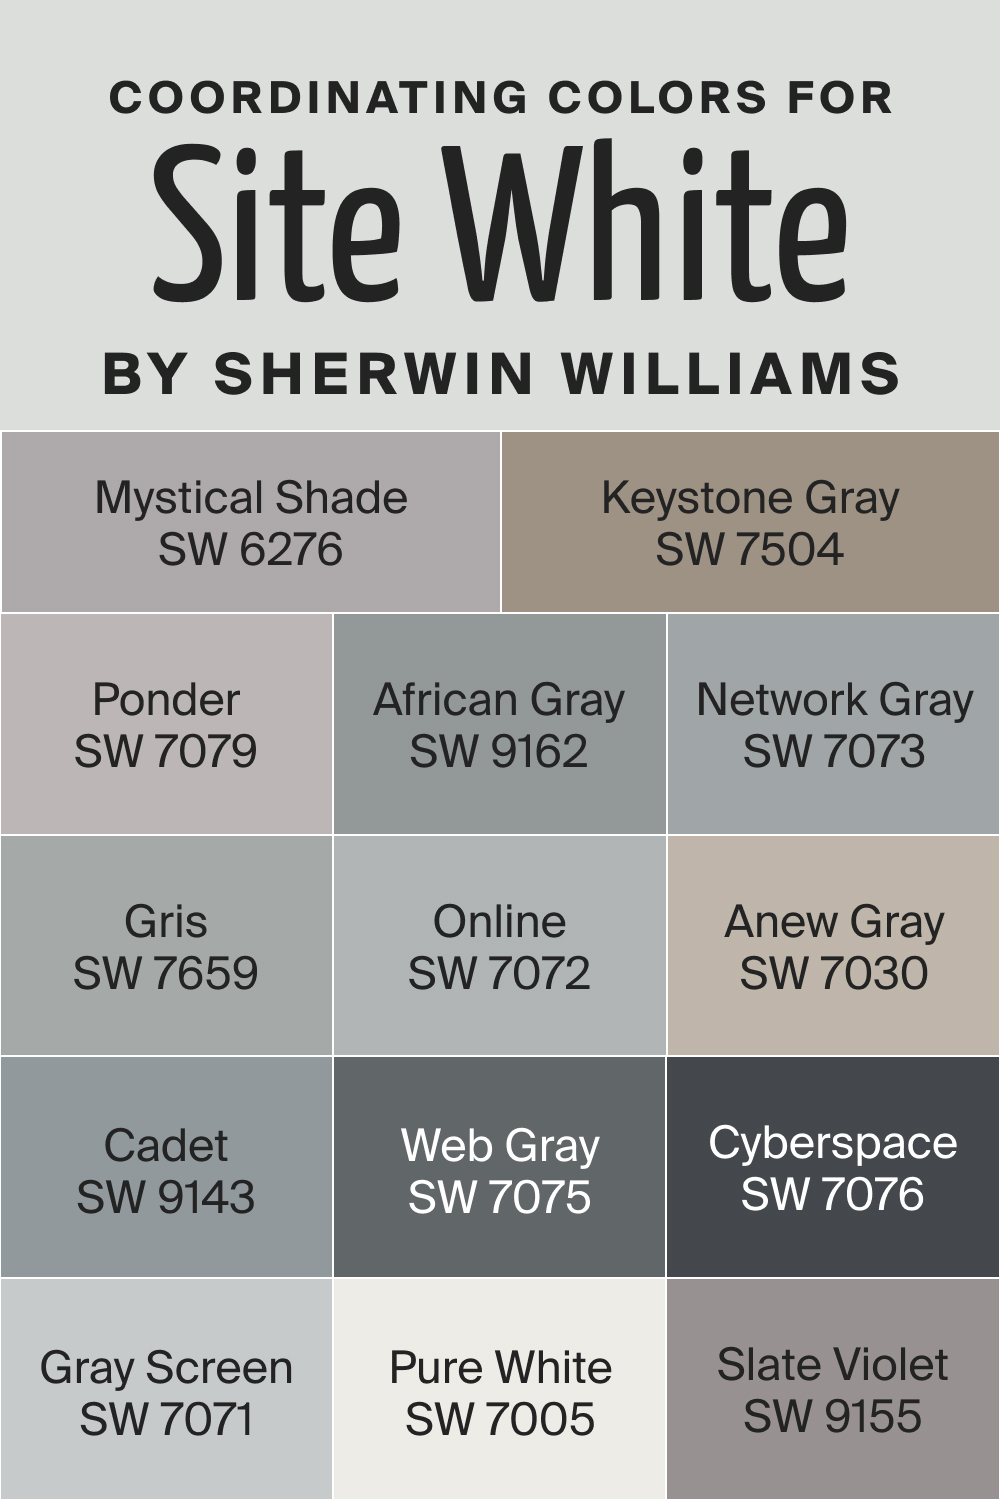 Coordinating Colors for SW Site White by Sherwin Williams